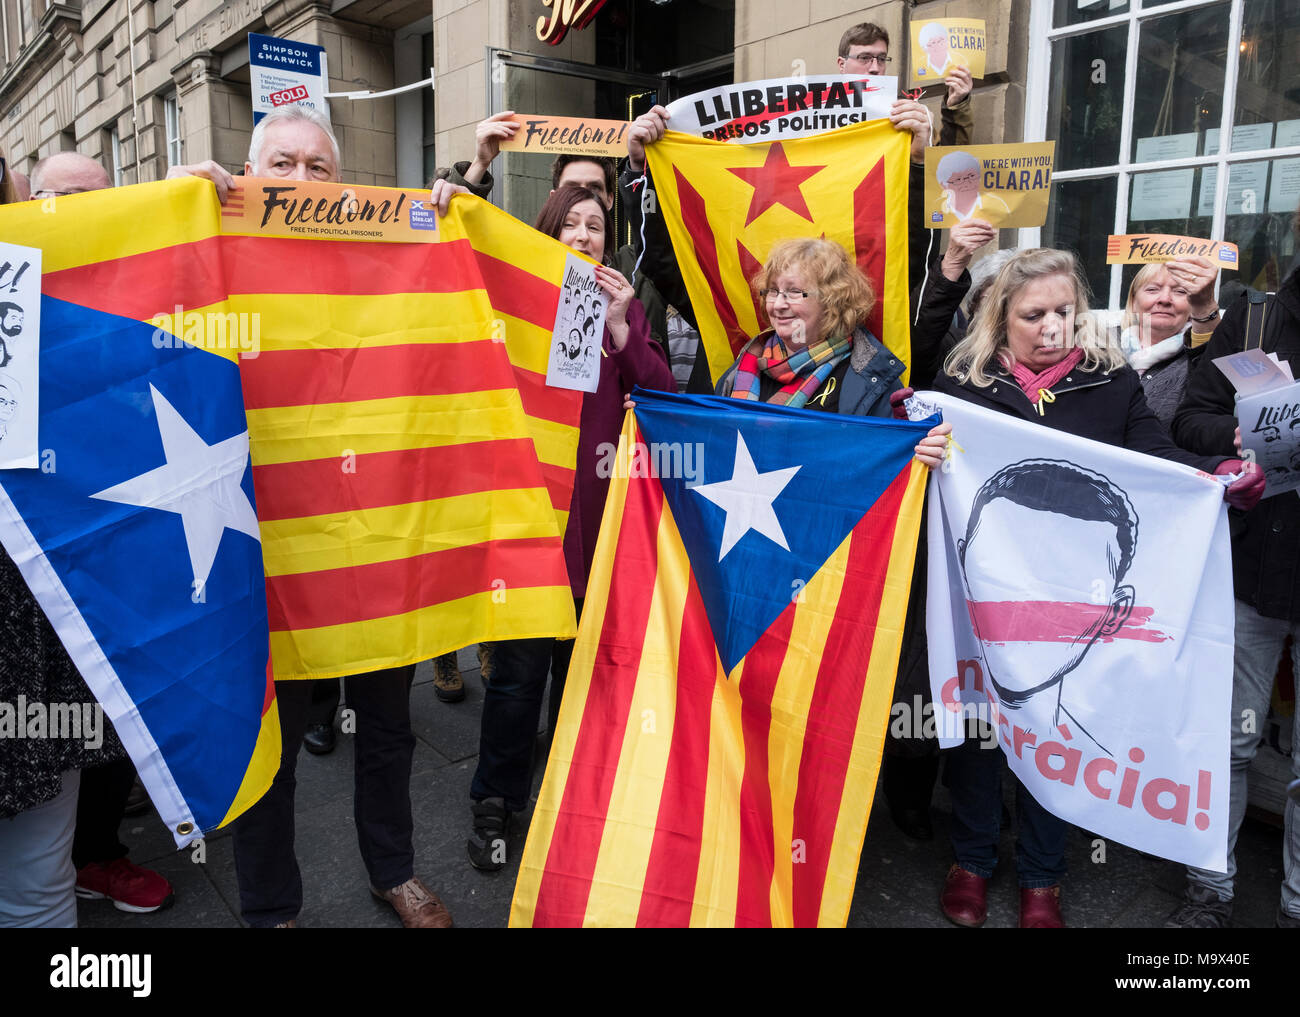 Edinburgh, Scotland,UK. 28 March 2018. Supporters of former Catalonia Education Minister and independence supporter Clara Ponsati outside Edinburgh Sheriff Court ahead of her bail hearing. Ponsati faces extradition to Spain. She was granted bail. Credit: Iain Masterton/Alamy Live News Stock Photo